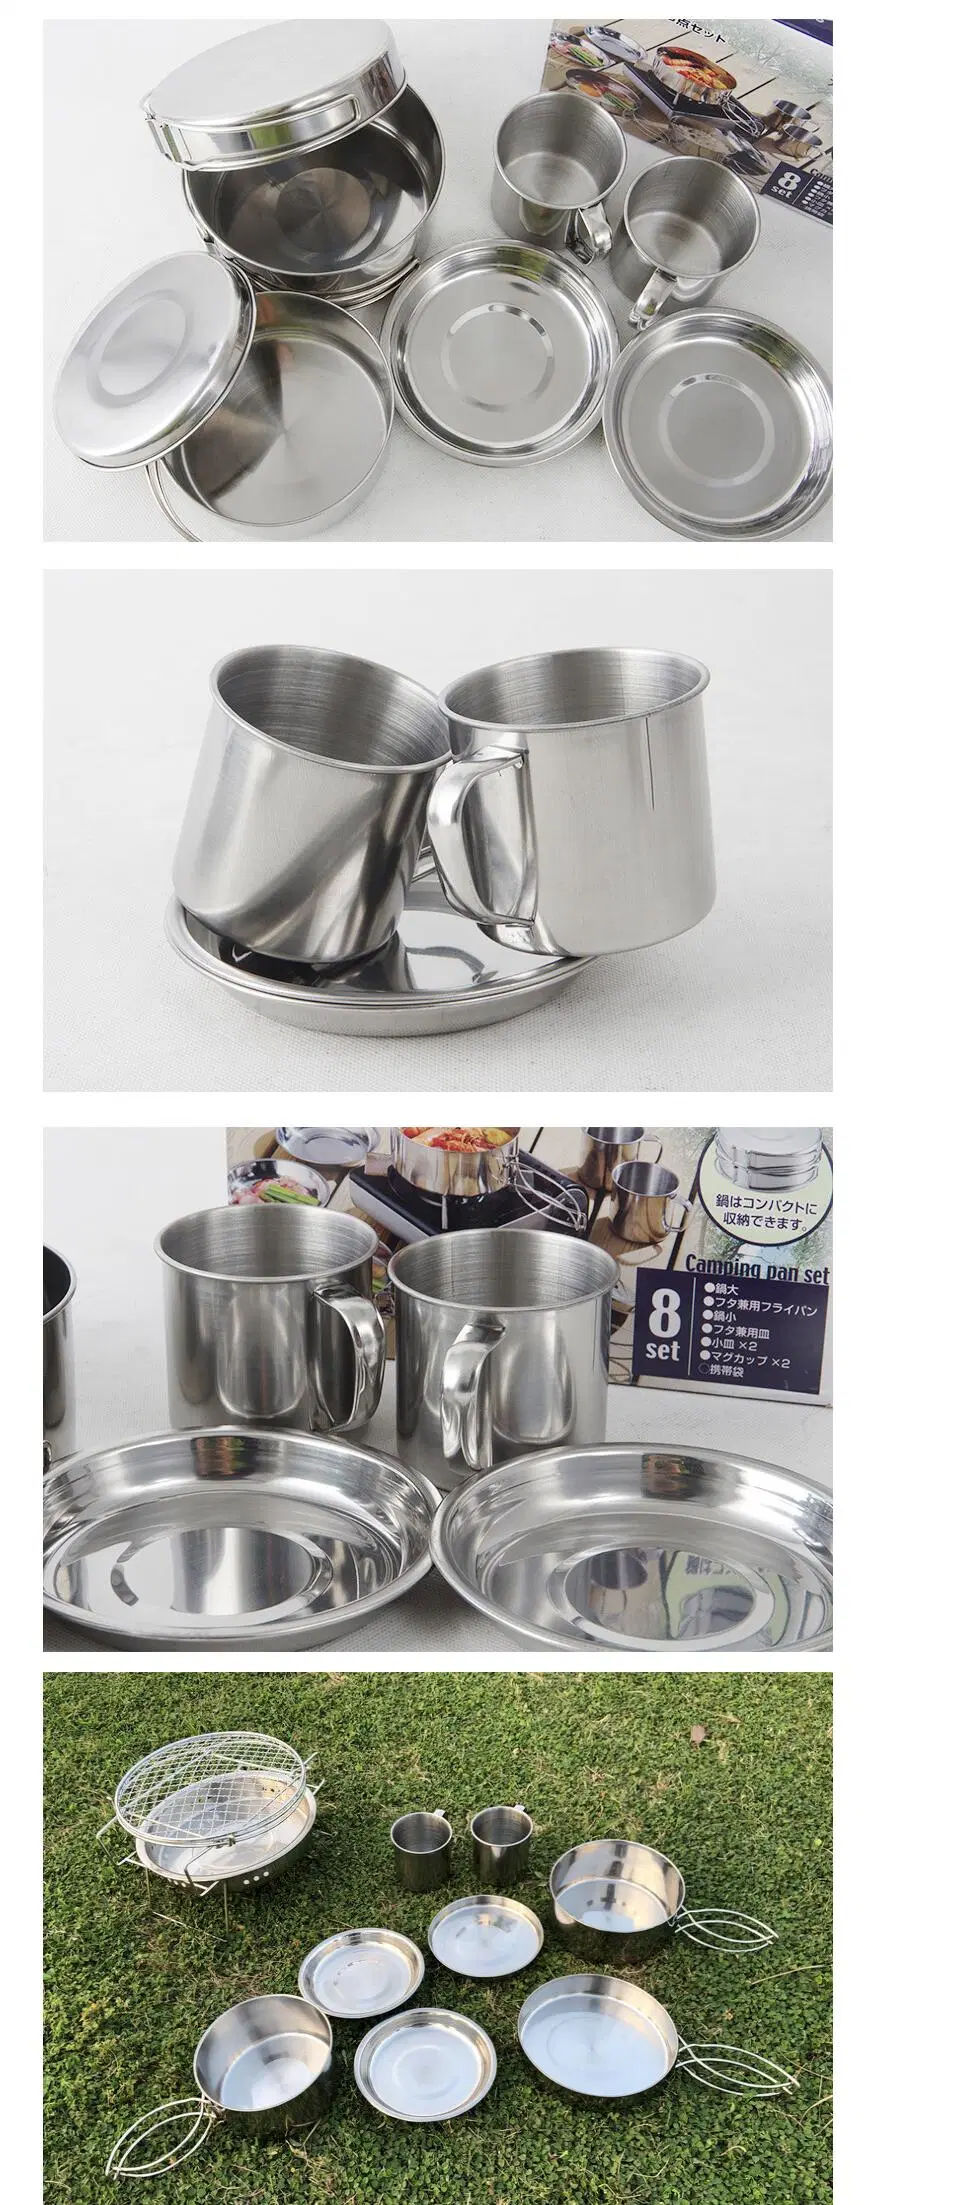 Wholesale Hiking Accessory Cooking Pot Set Stainless Steel Outdoor Camping Cookware